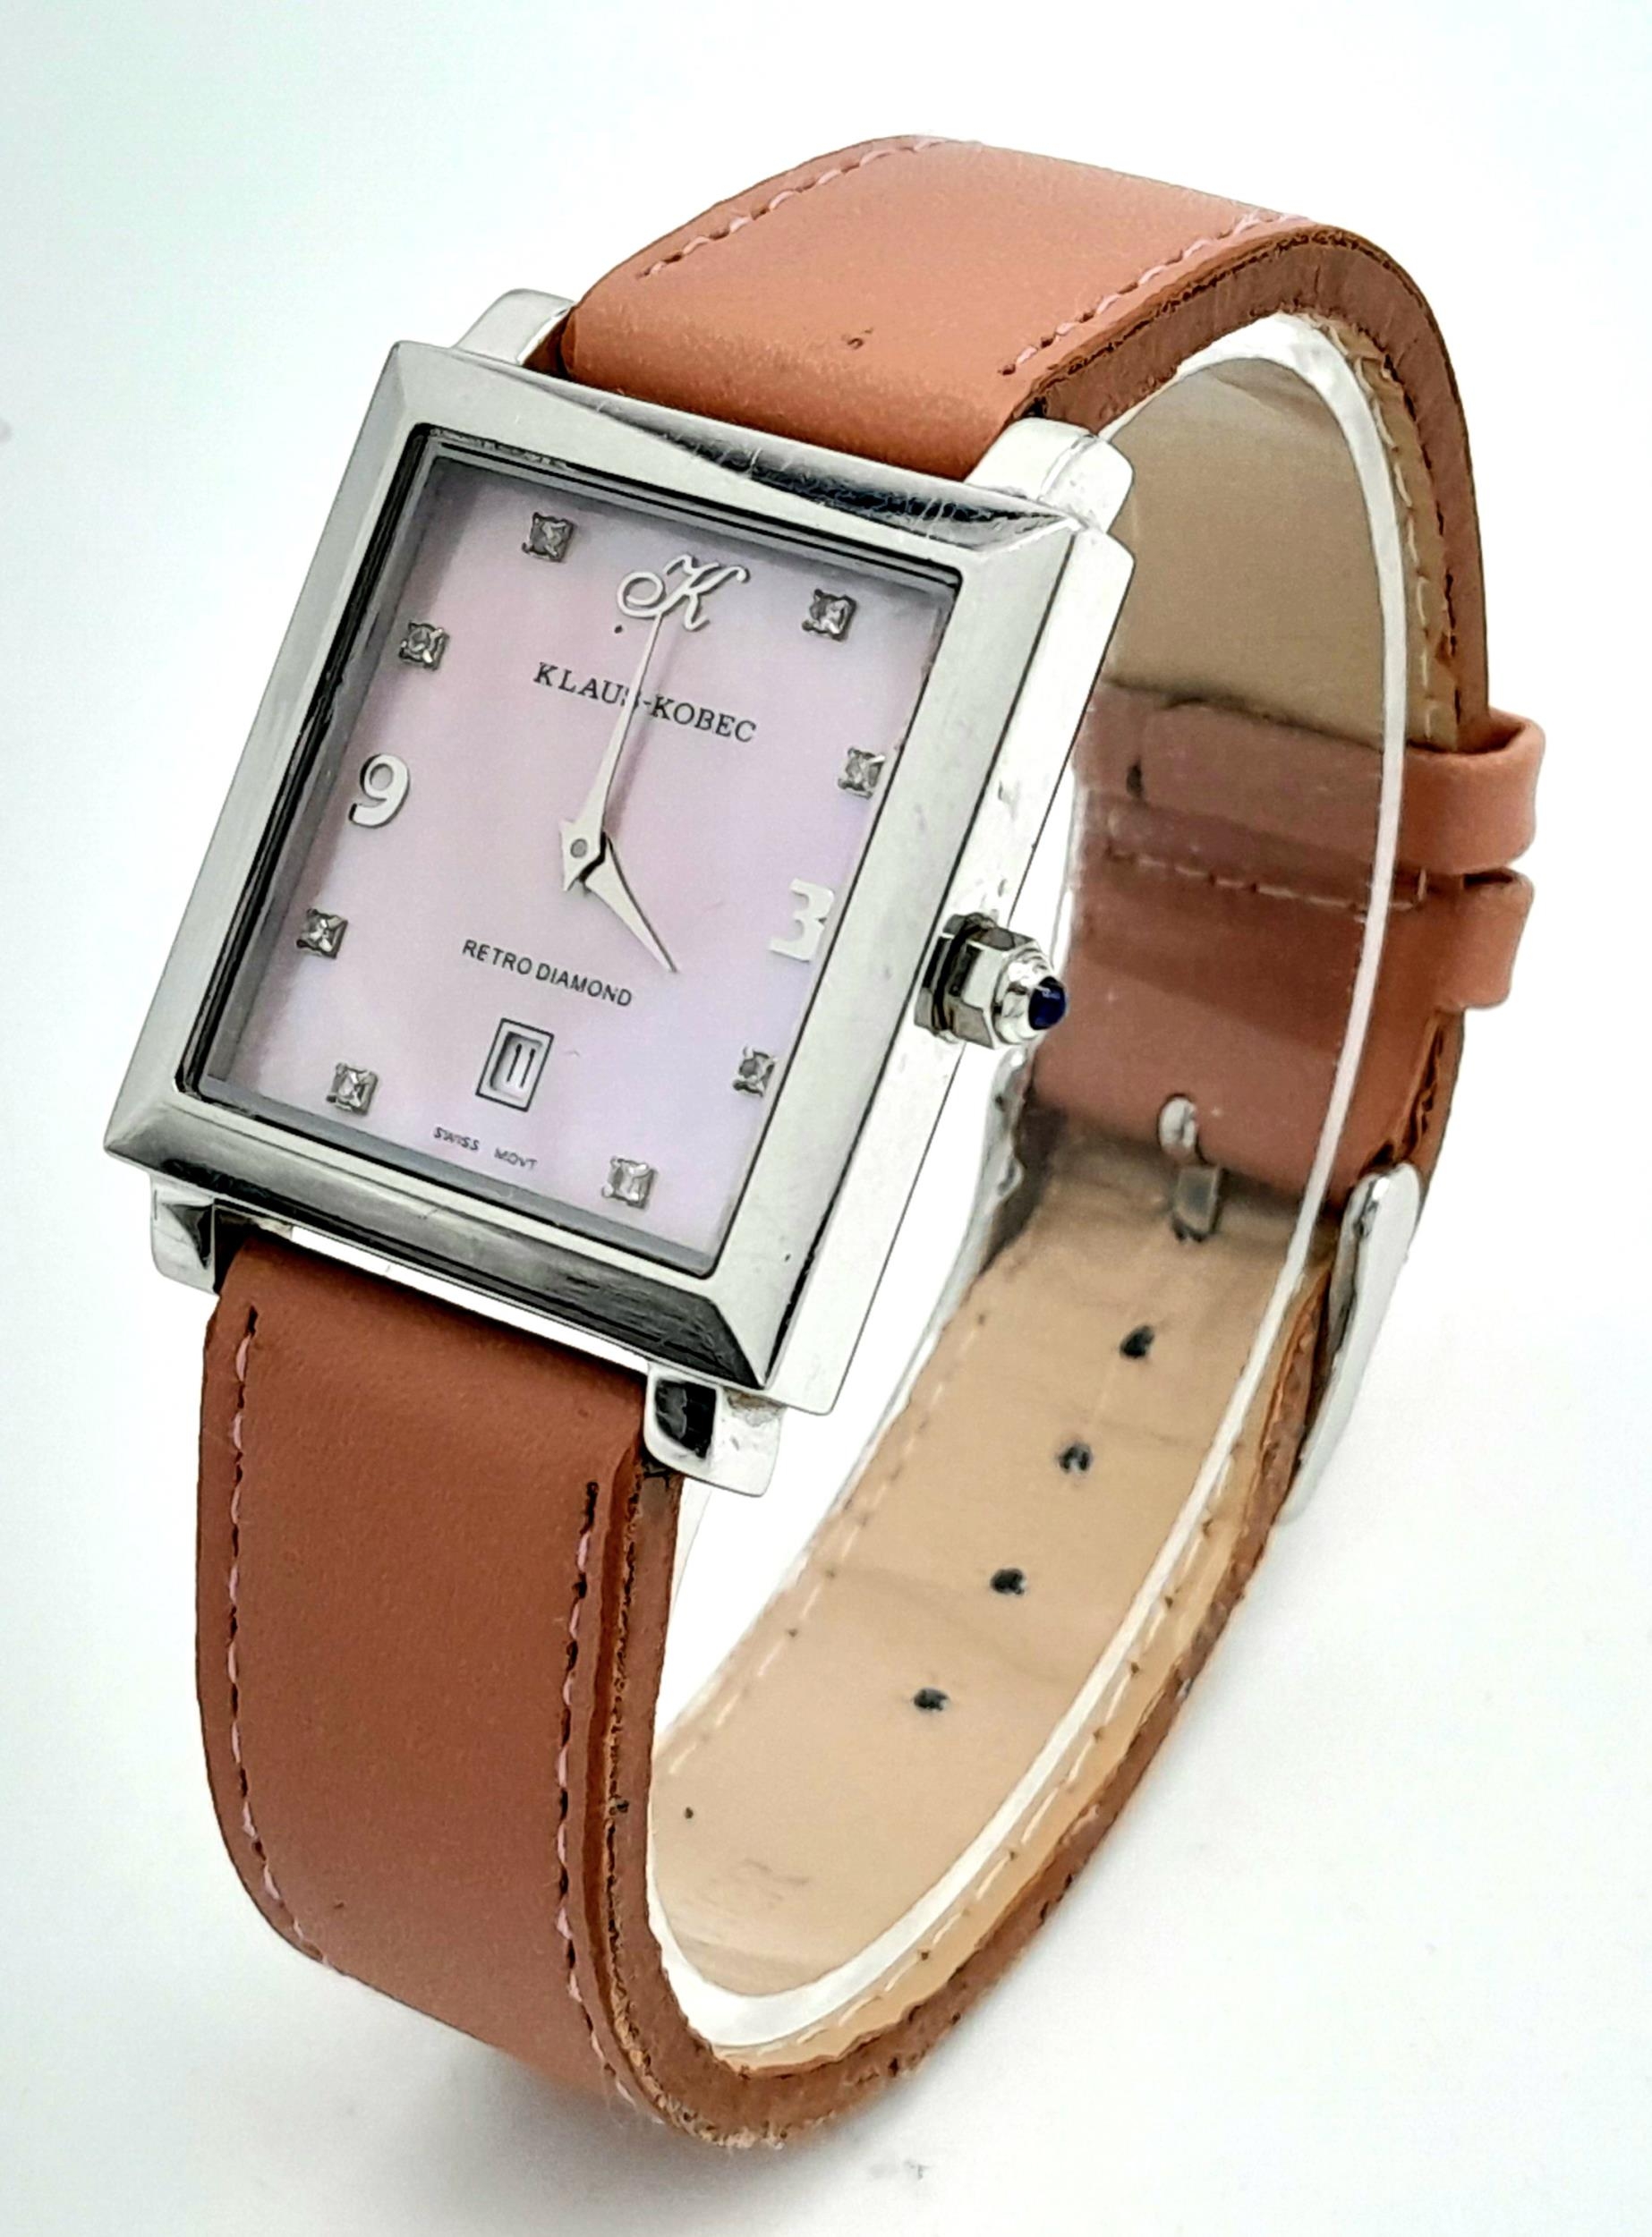 A Retro Diamond Klaus Kobec Pink Mother of Pearl Unisex Quartz Watch. Pink leather strap. Stainless